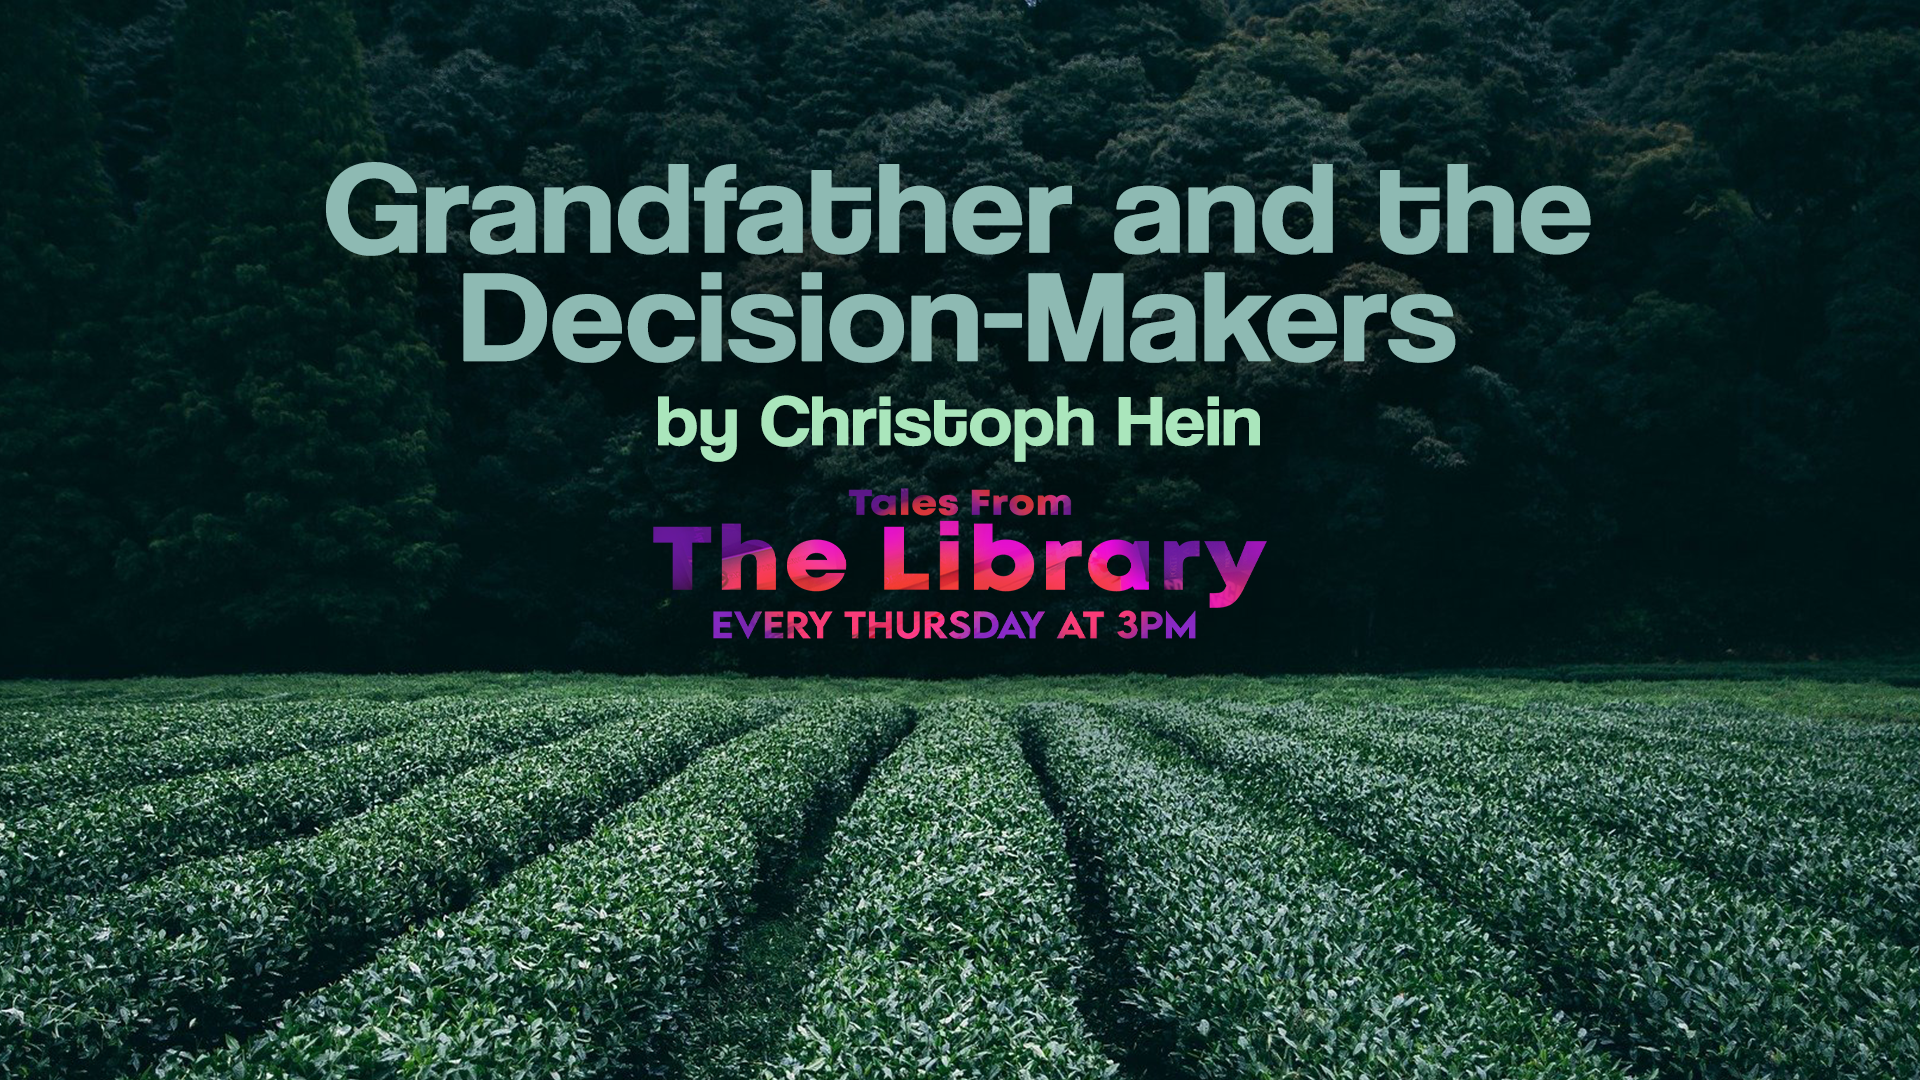 Tales From The Library - Grandfather and the Decision-Makers